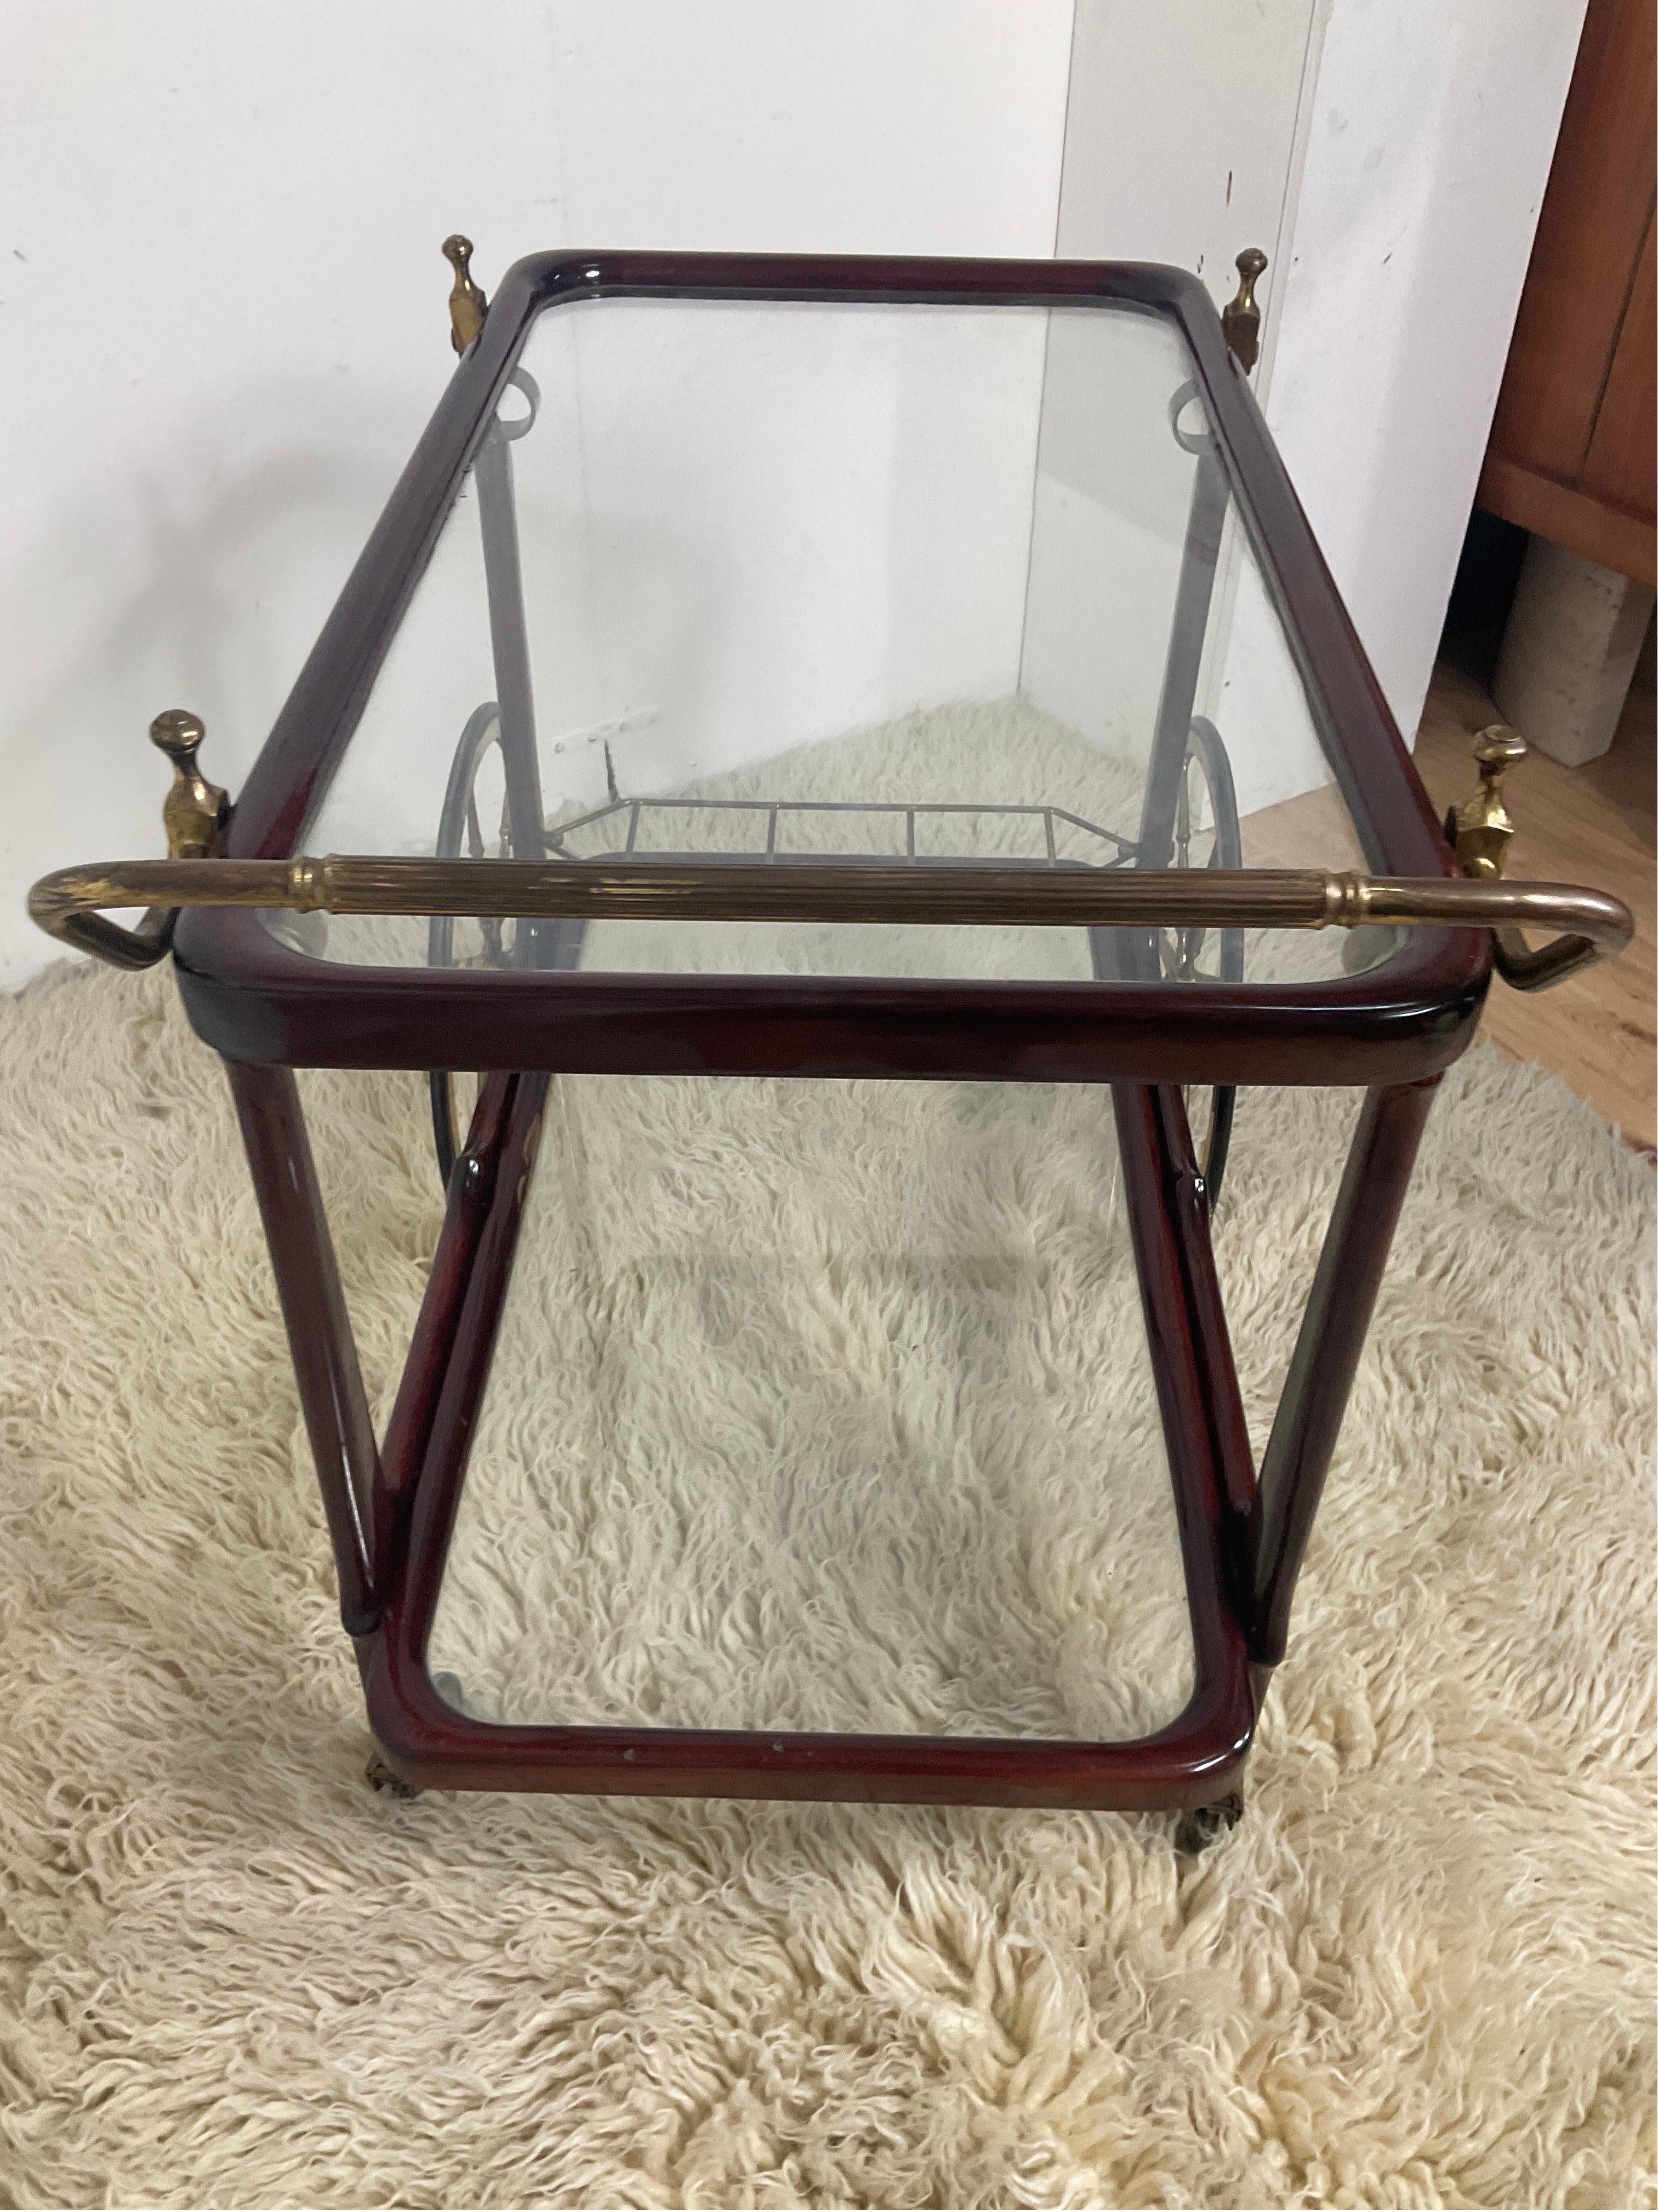 Brass Bar trolly food rack in lacquered wood, brass and vintage 50s glass with 4 wheel For Sale